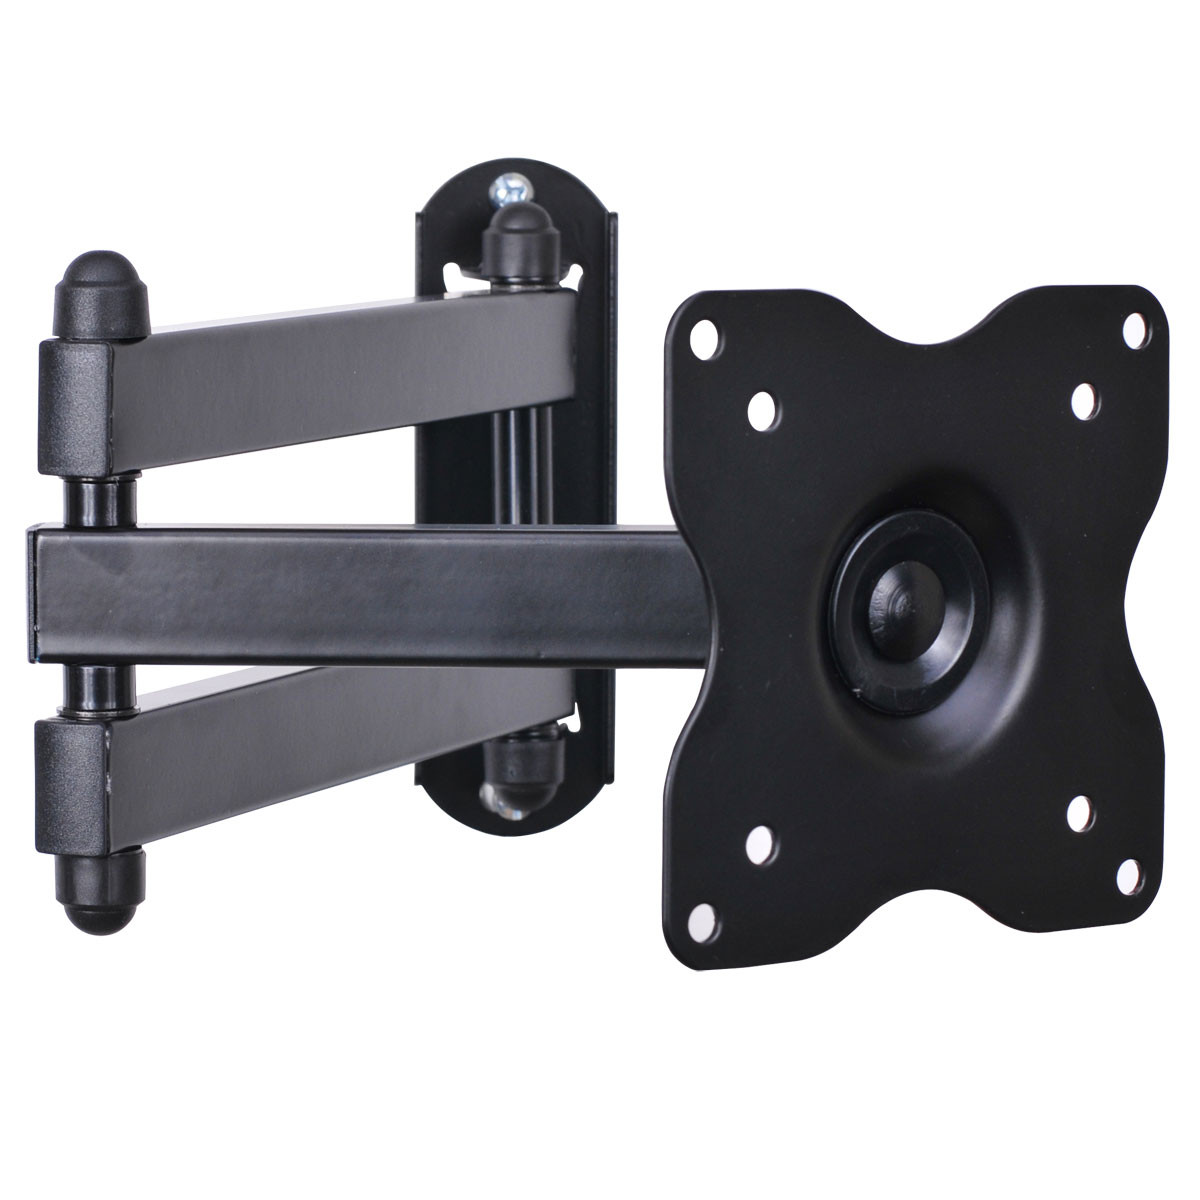 VideoSecu ML12B TV LCD Monitor Wall Mount Full Motion 15 inch Extension Arm  Articulating Tilt Swivel for most 19-32, some models up to 47, LED TV  Flat Panel Screen with VESA 100x100